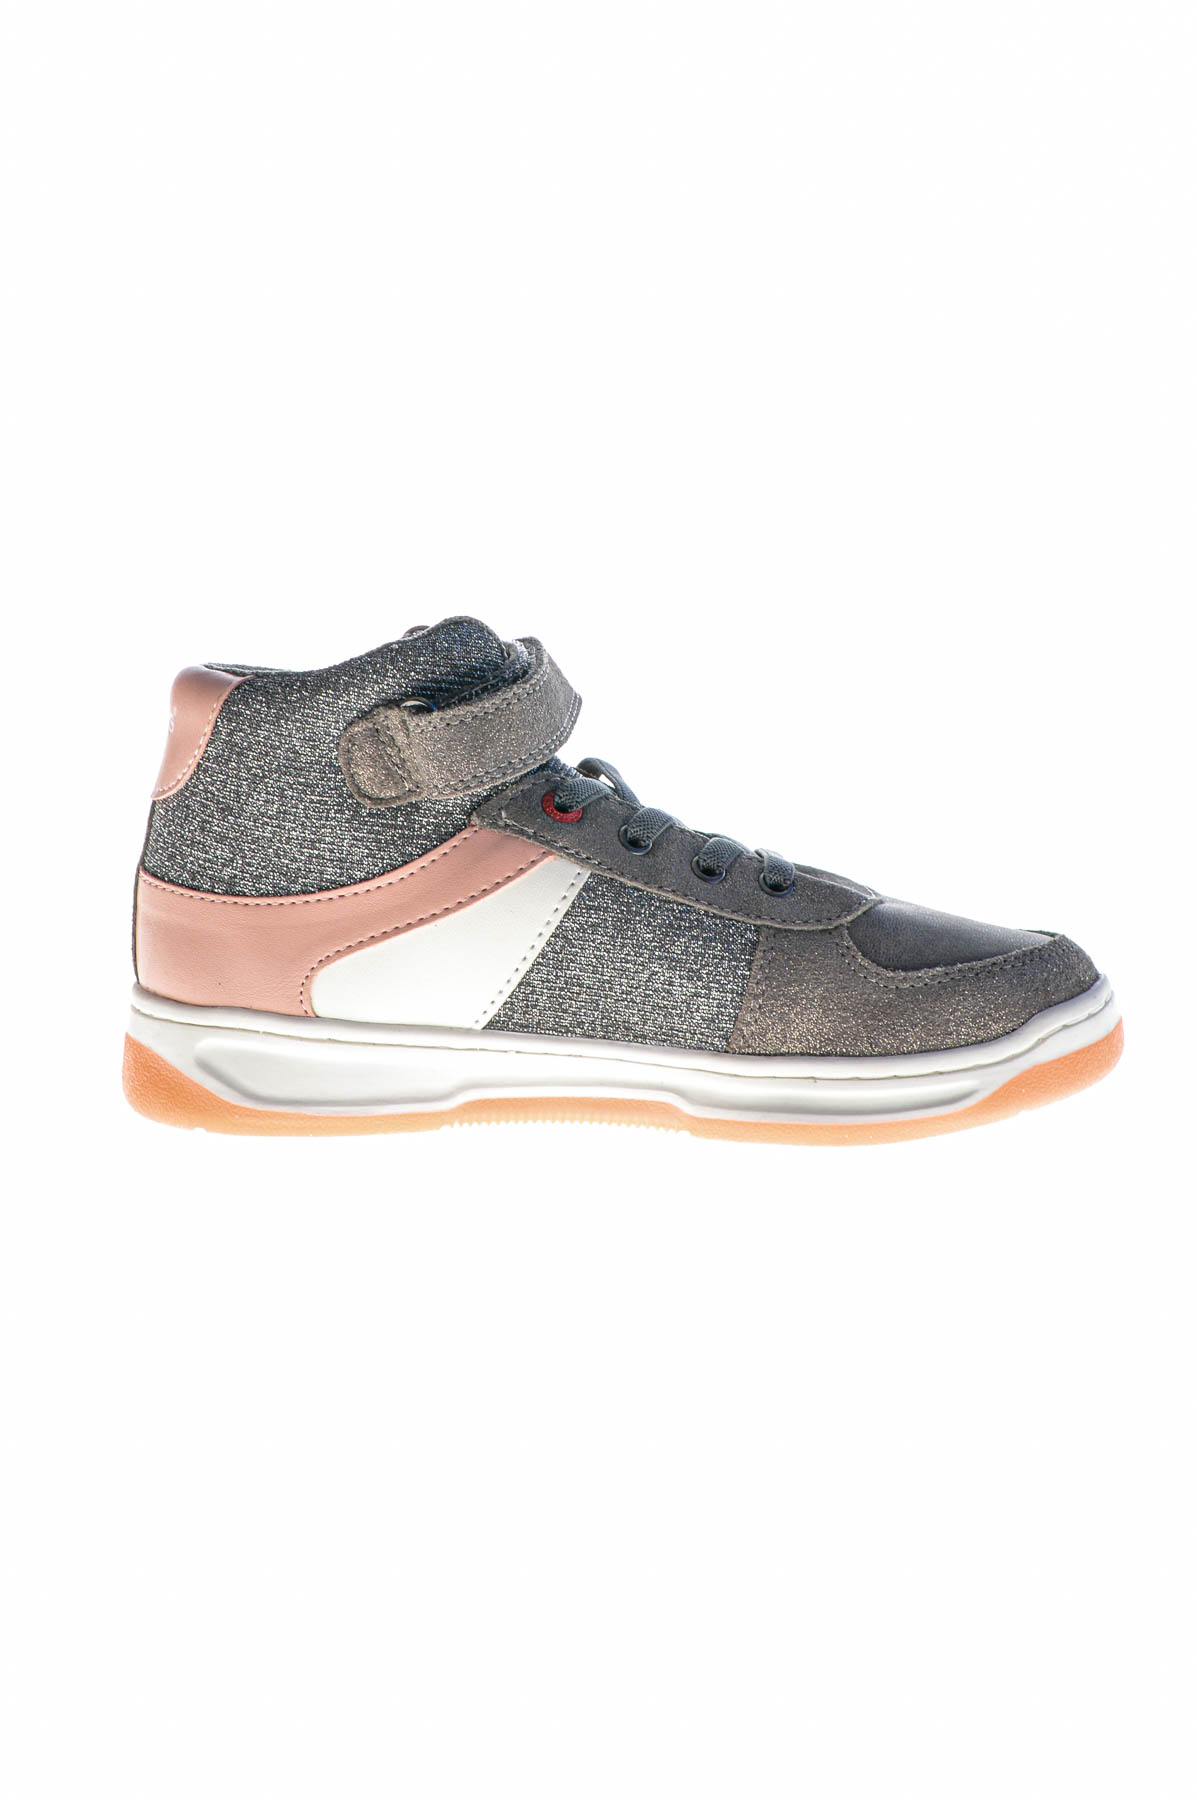 Sneakers for girls - KicKers - 2